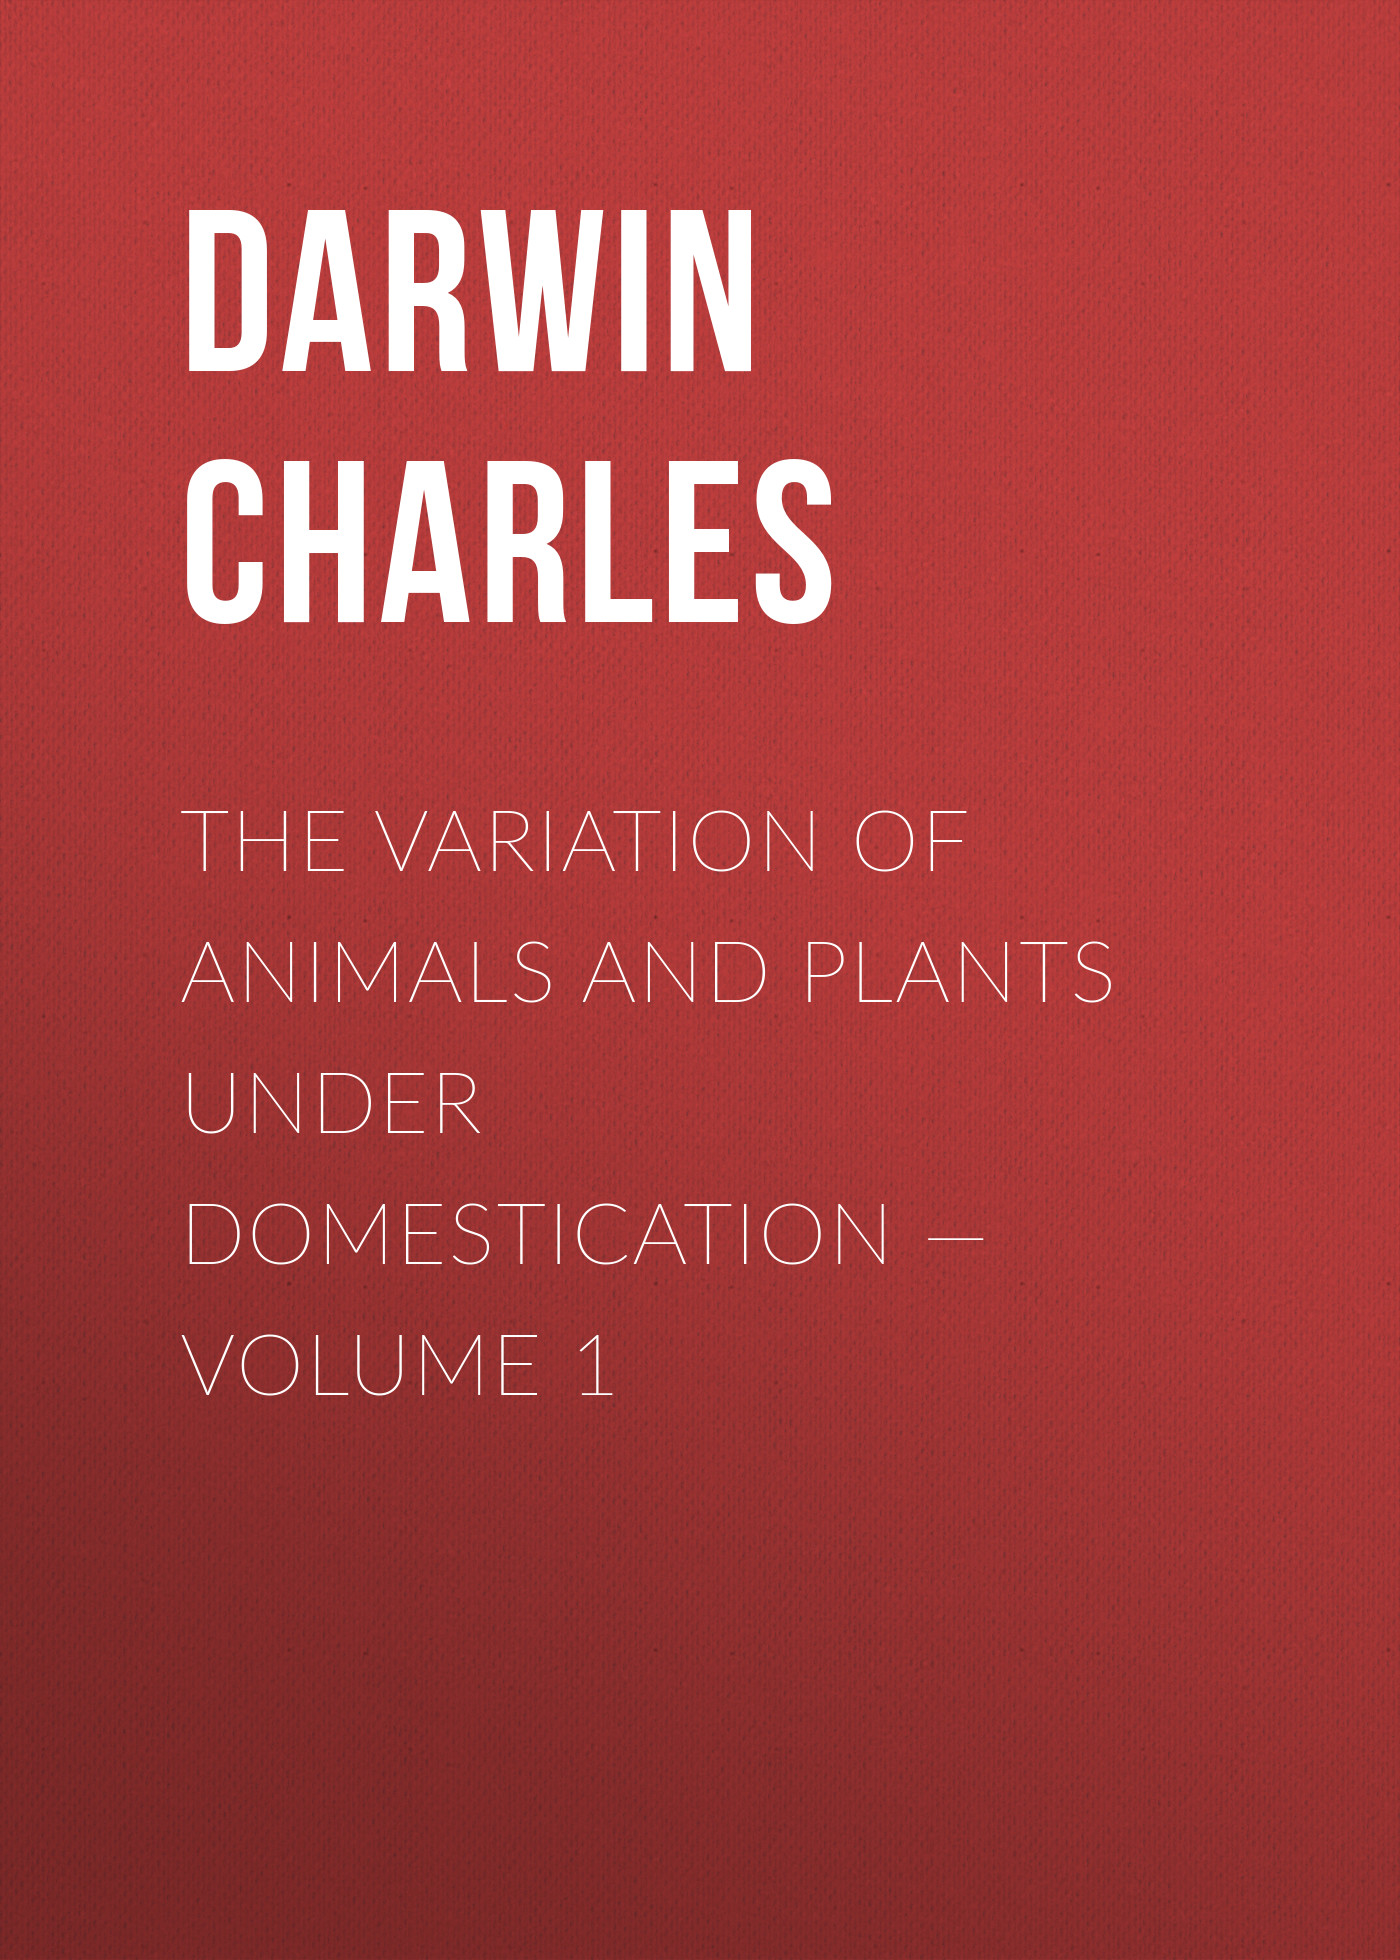 The Variation of Animals and Plants under Domestication— Volume 1